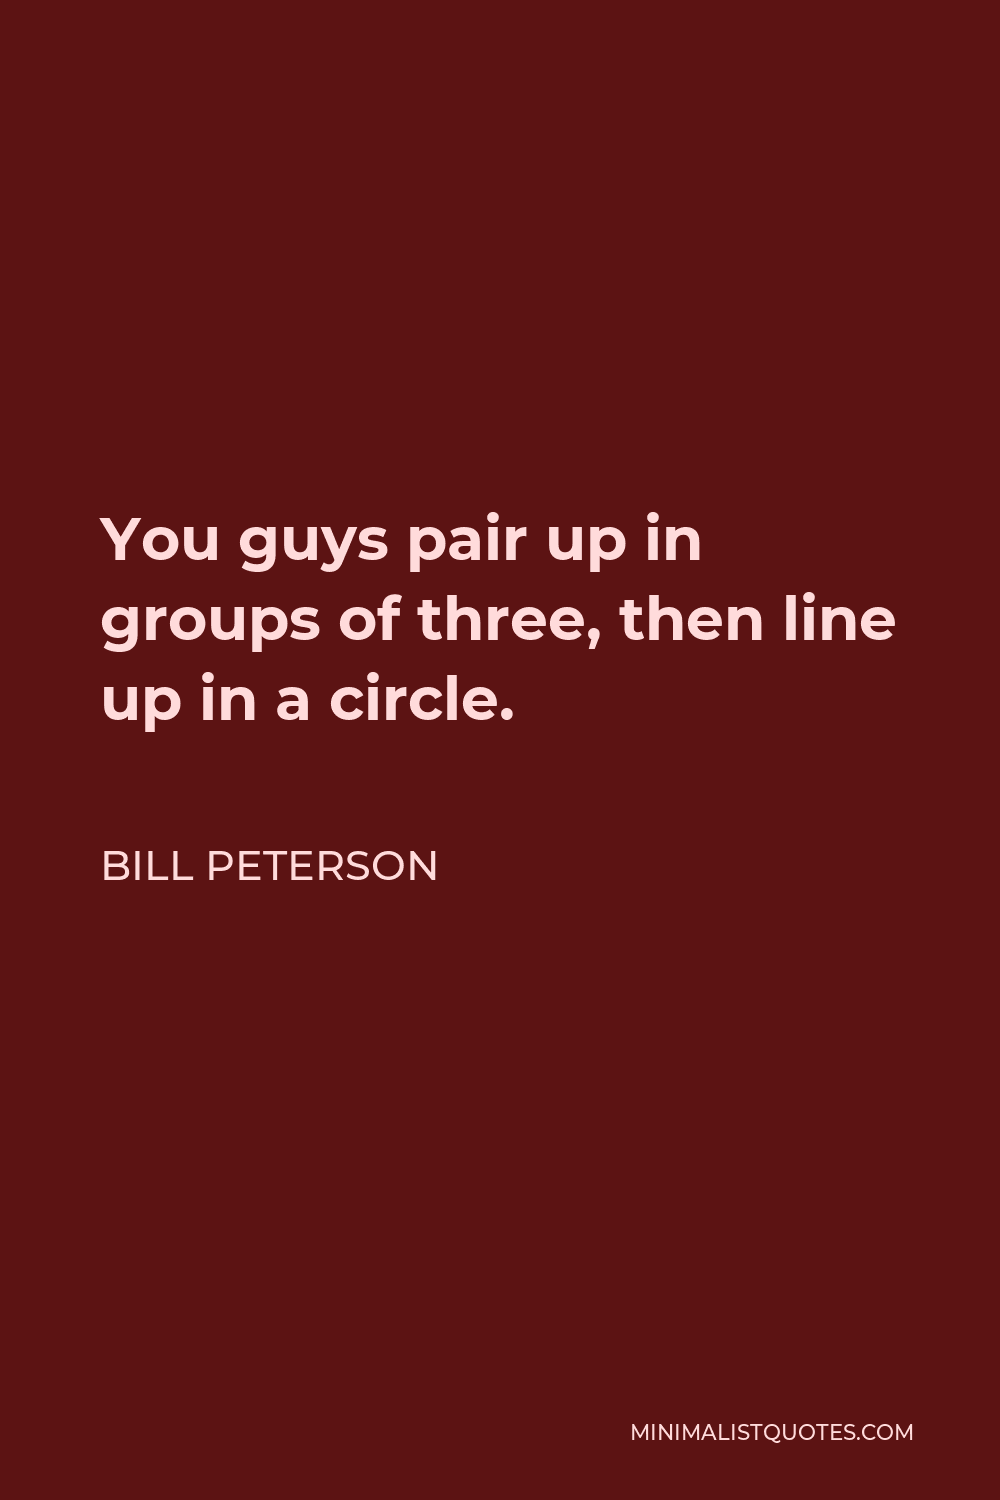 Bill Peterson Quote - You guys pair up in groups of three, then line up in a circle.